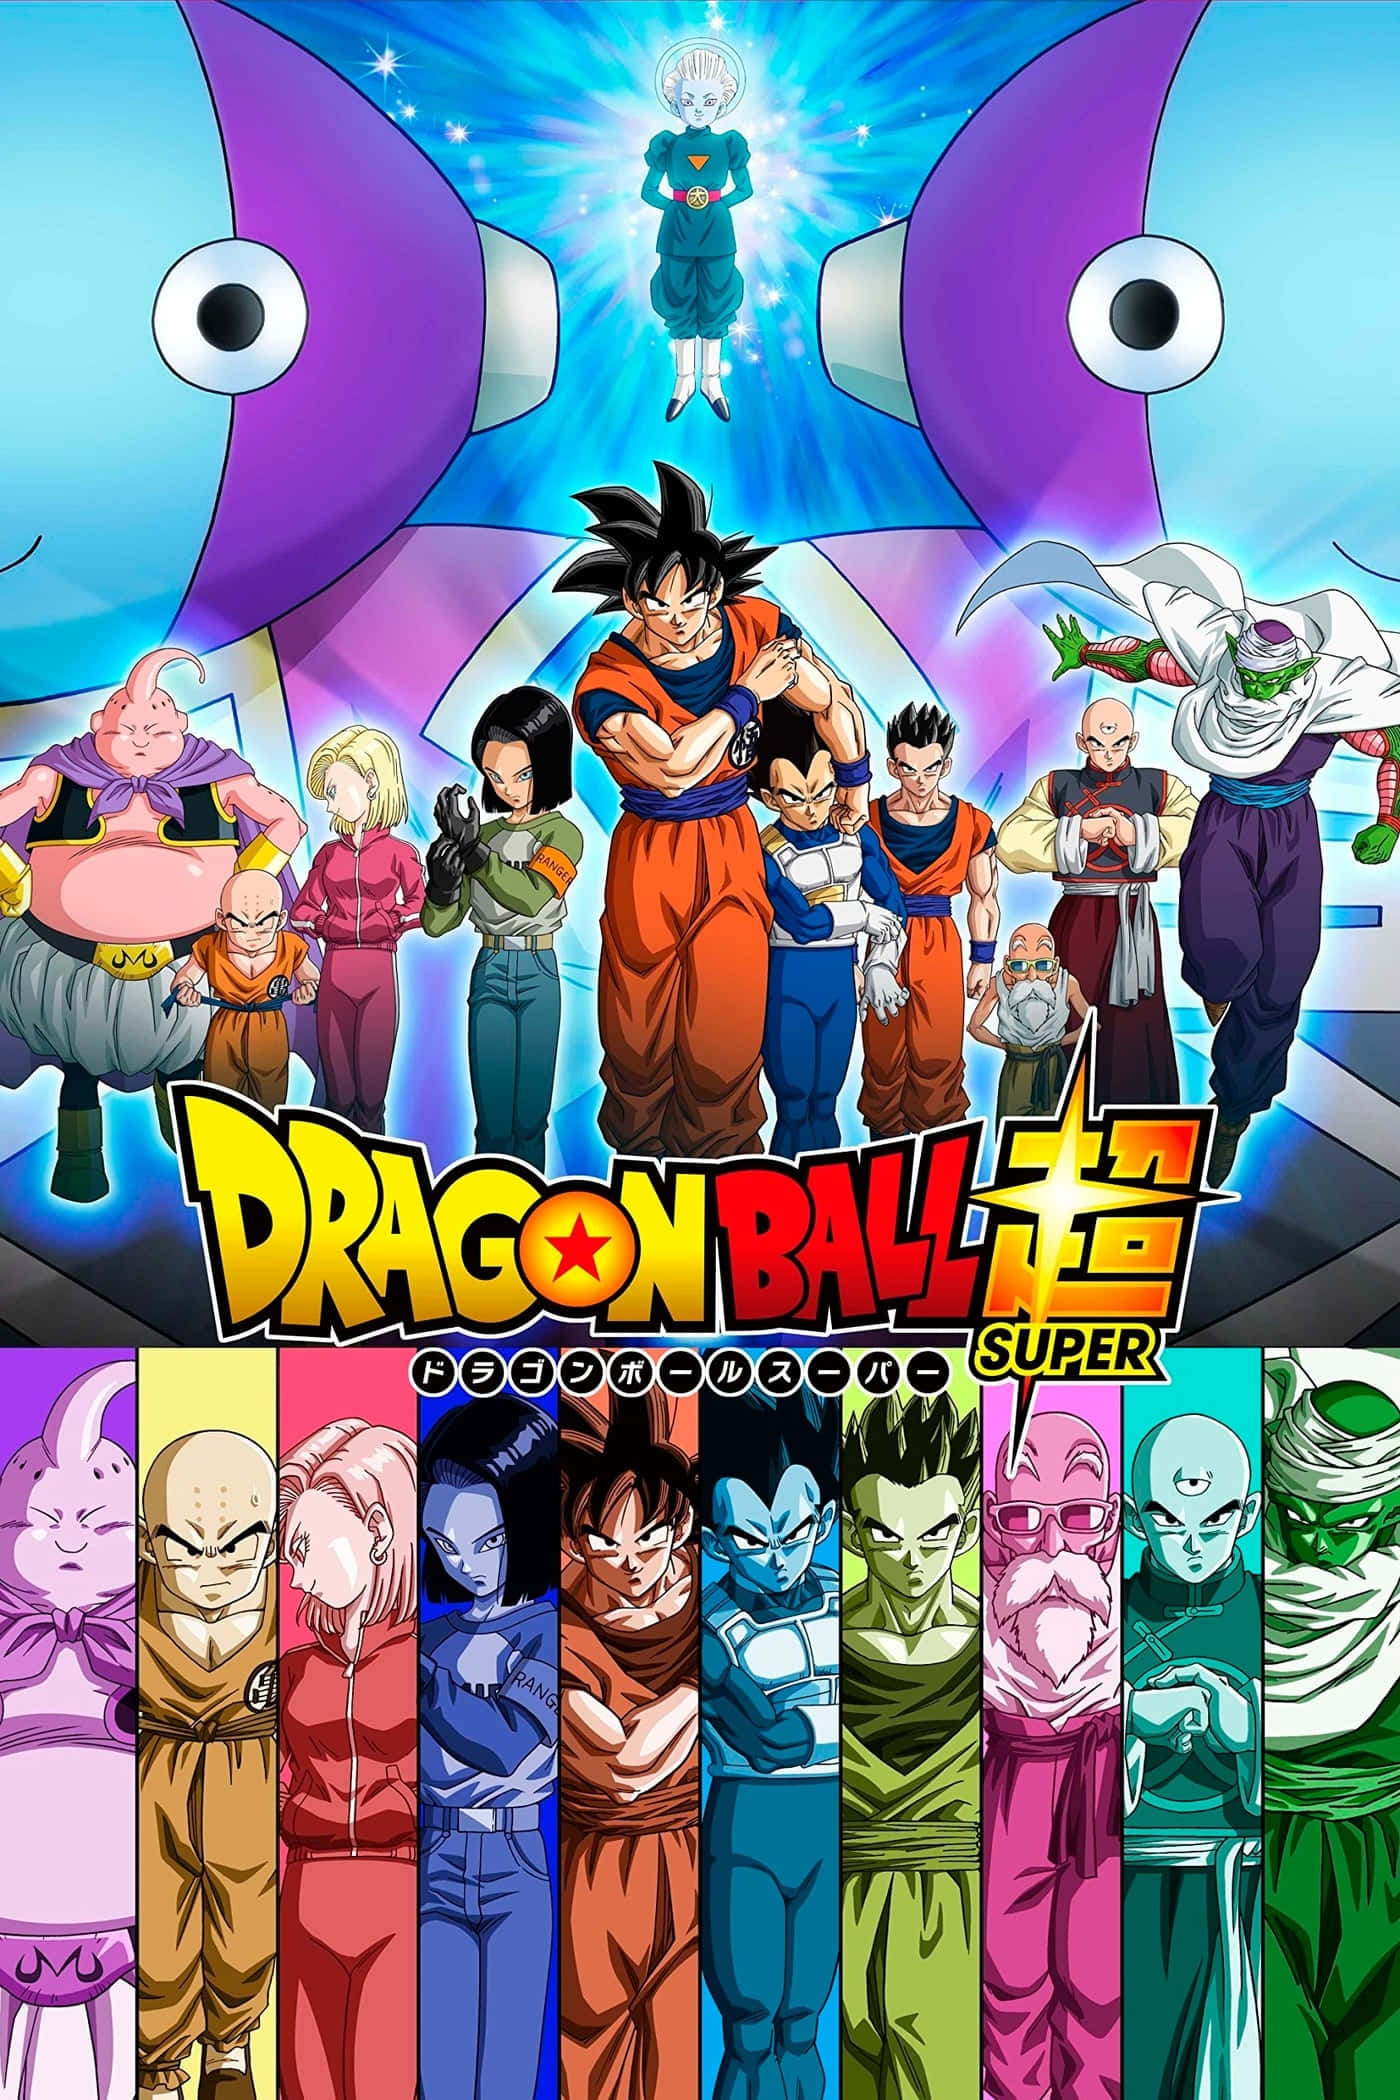 Dragon Ball Super' Broly Film & Poster Reveal